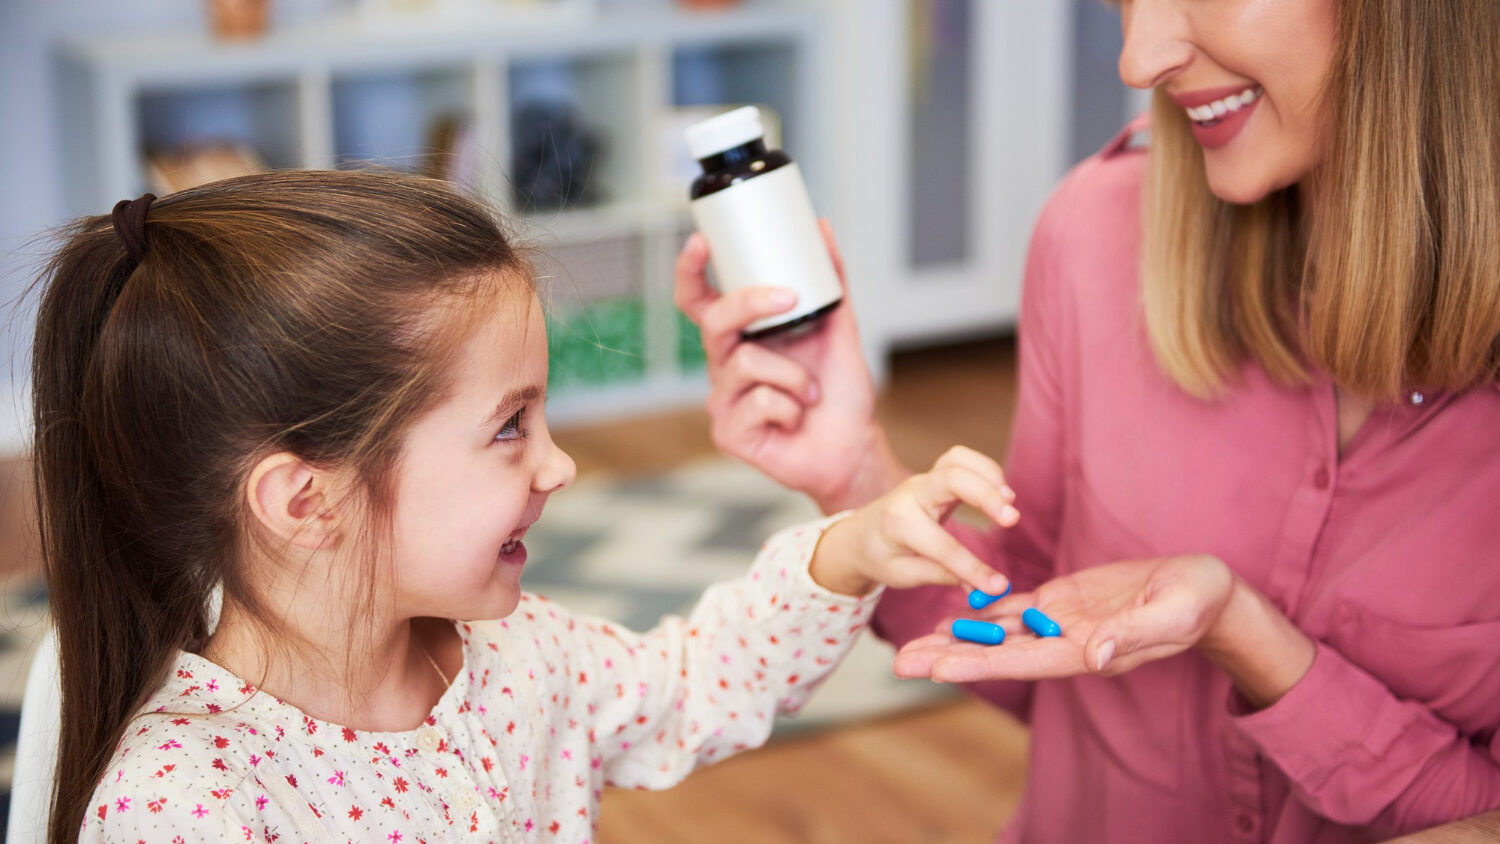 Medications for Autism Treatment